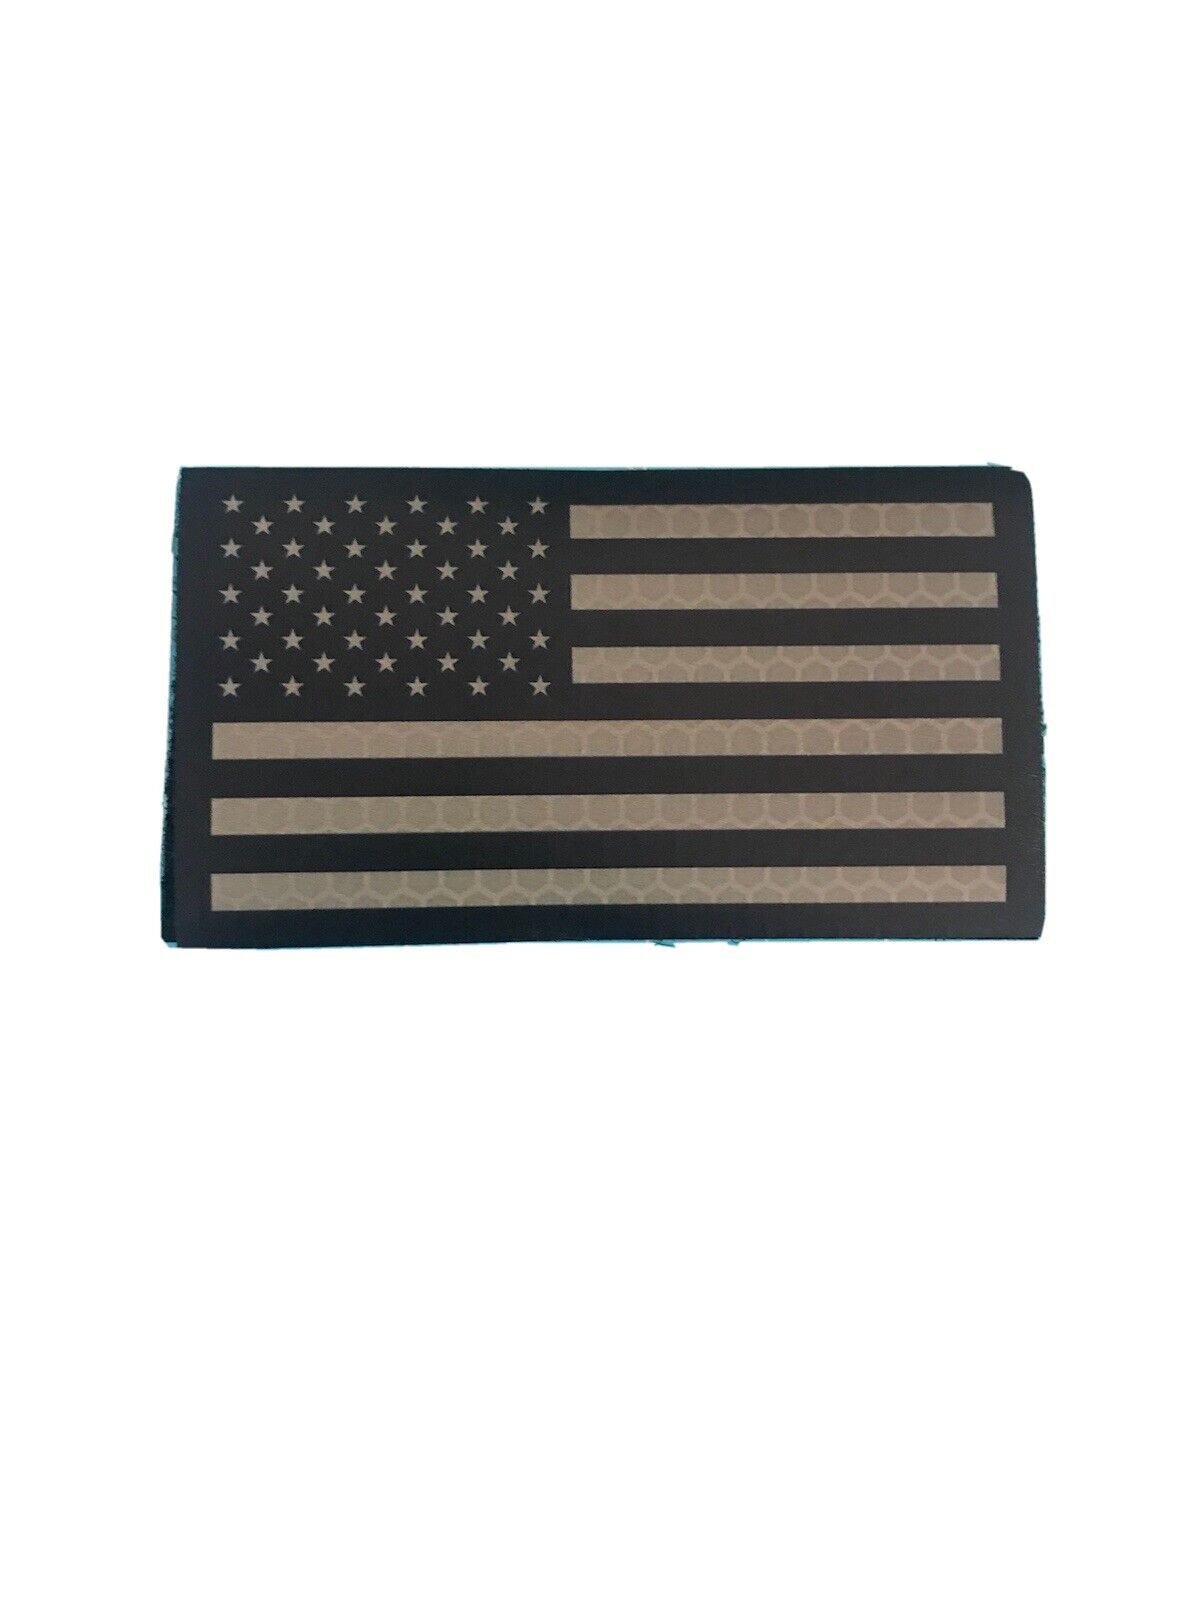 New OD green and black American flag reflective morale patch